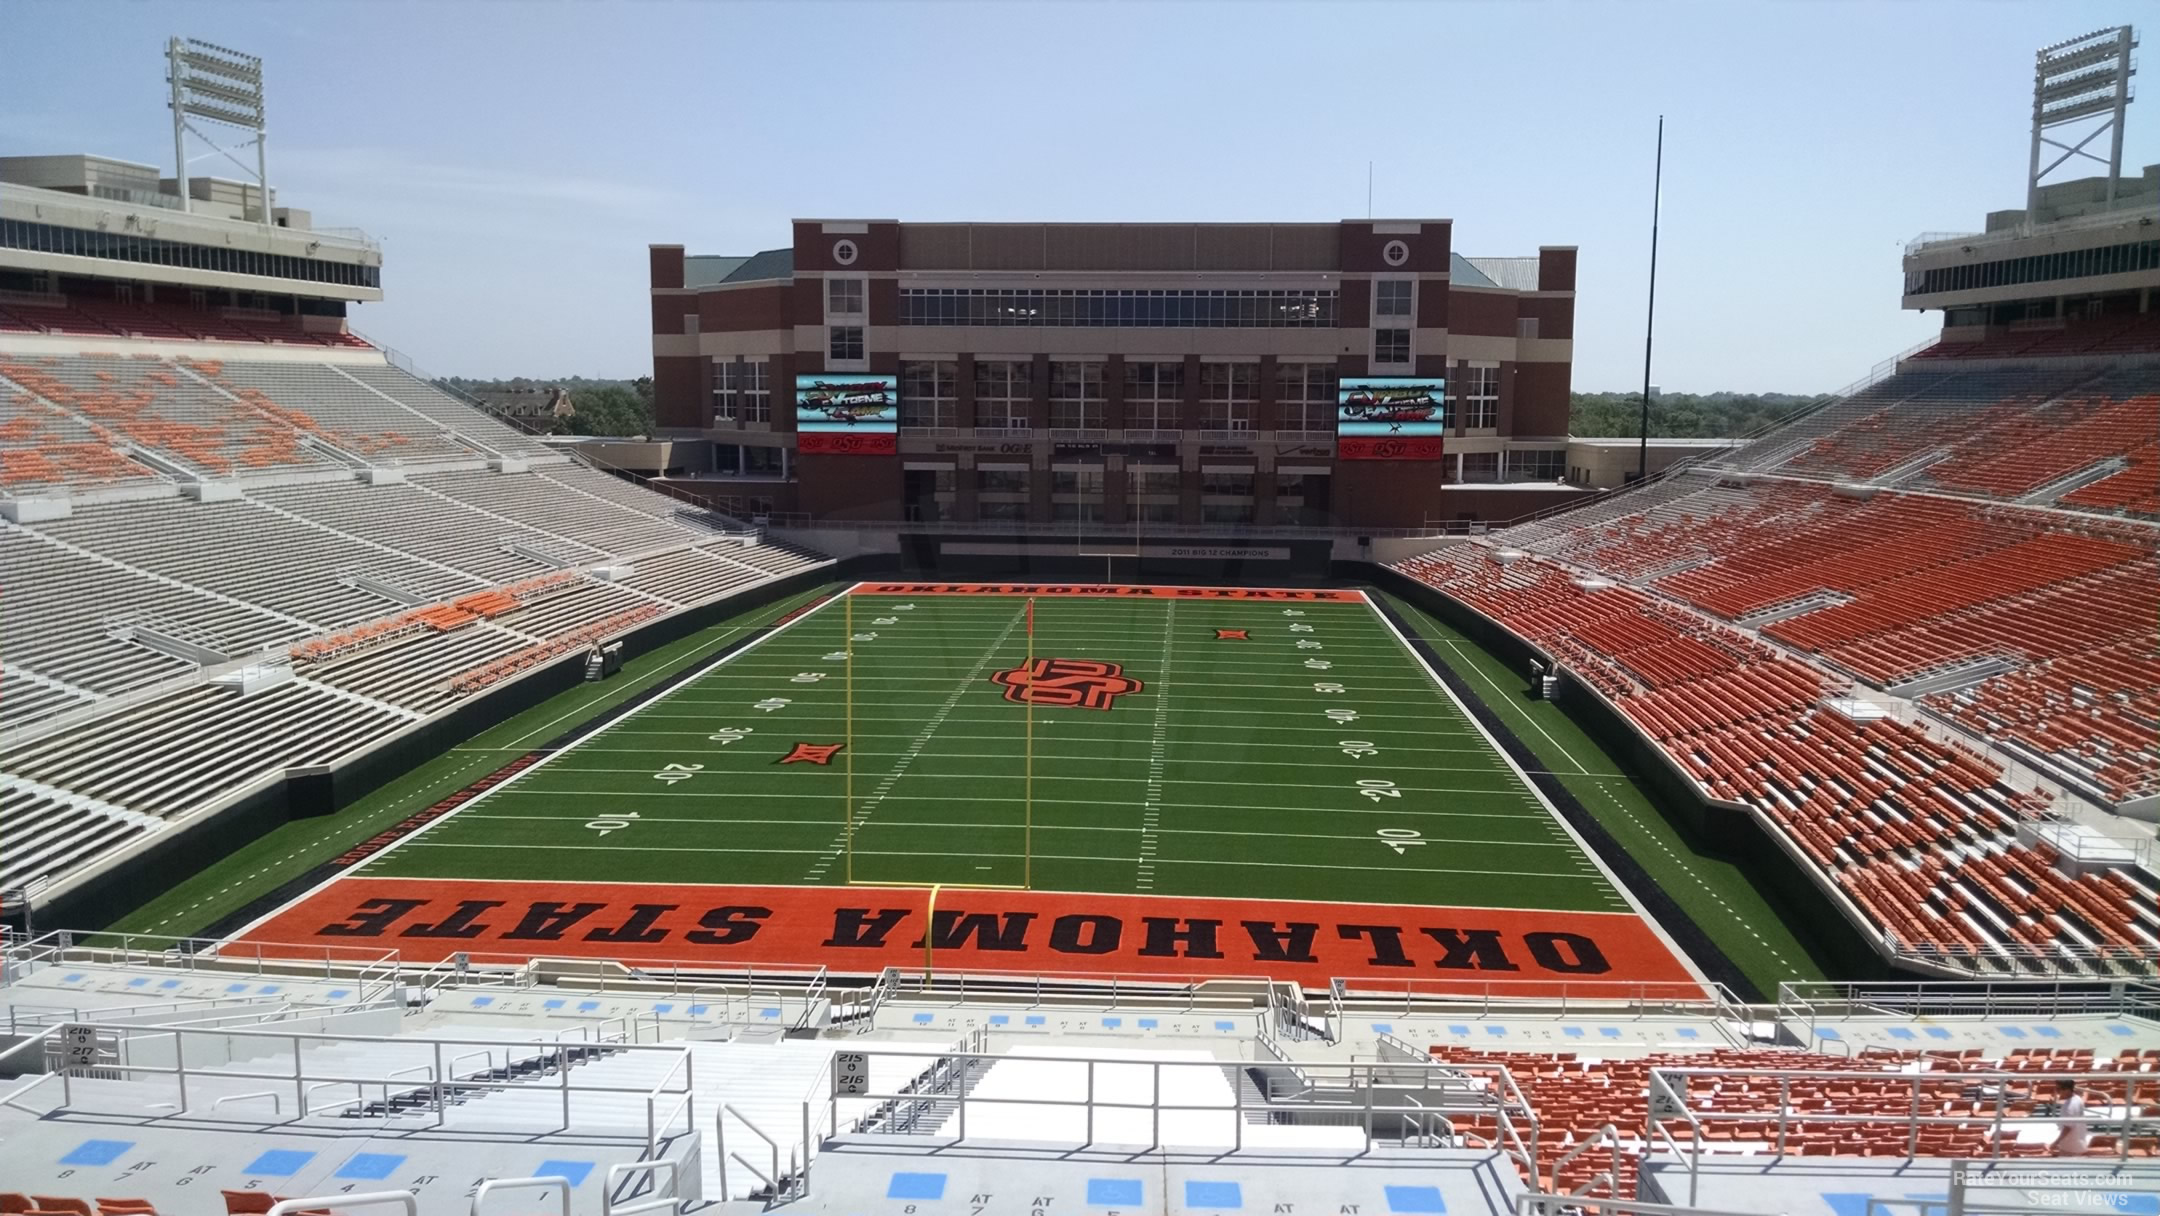 section 318, row 19 seat view  - boone pickens stadium